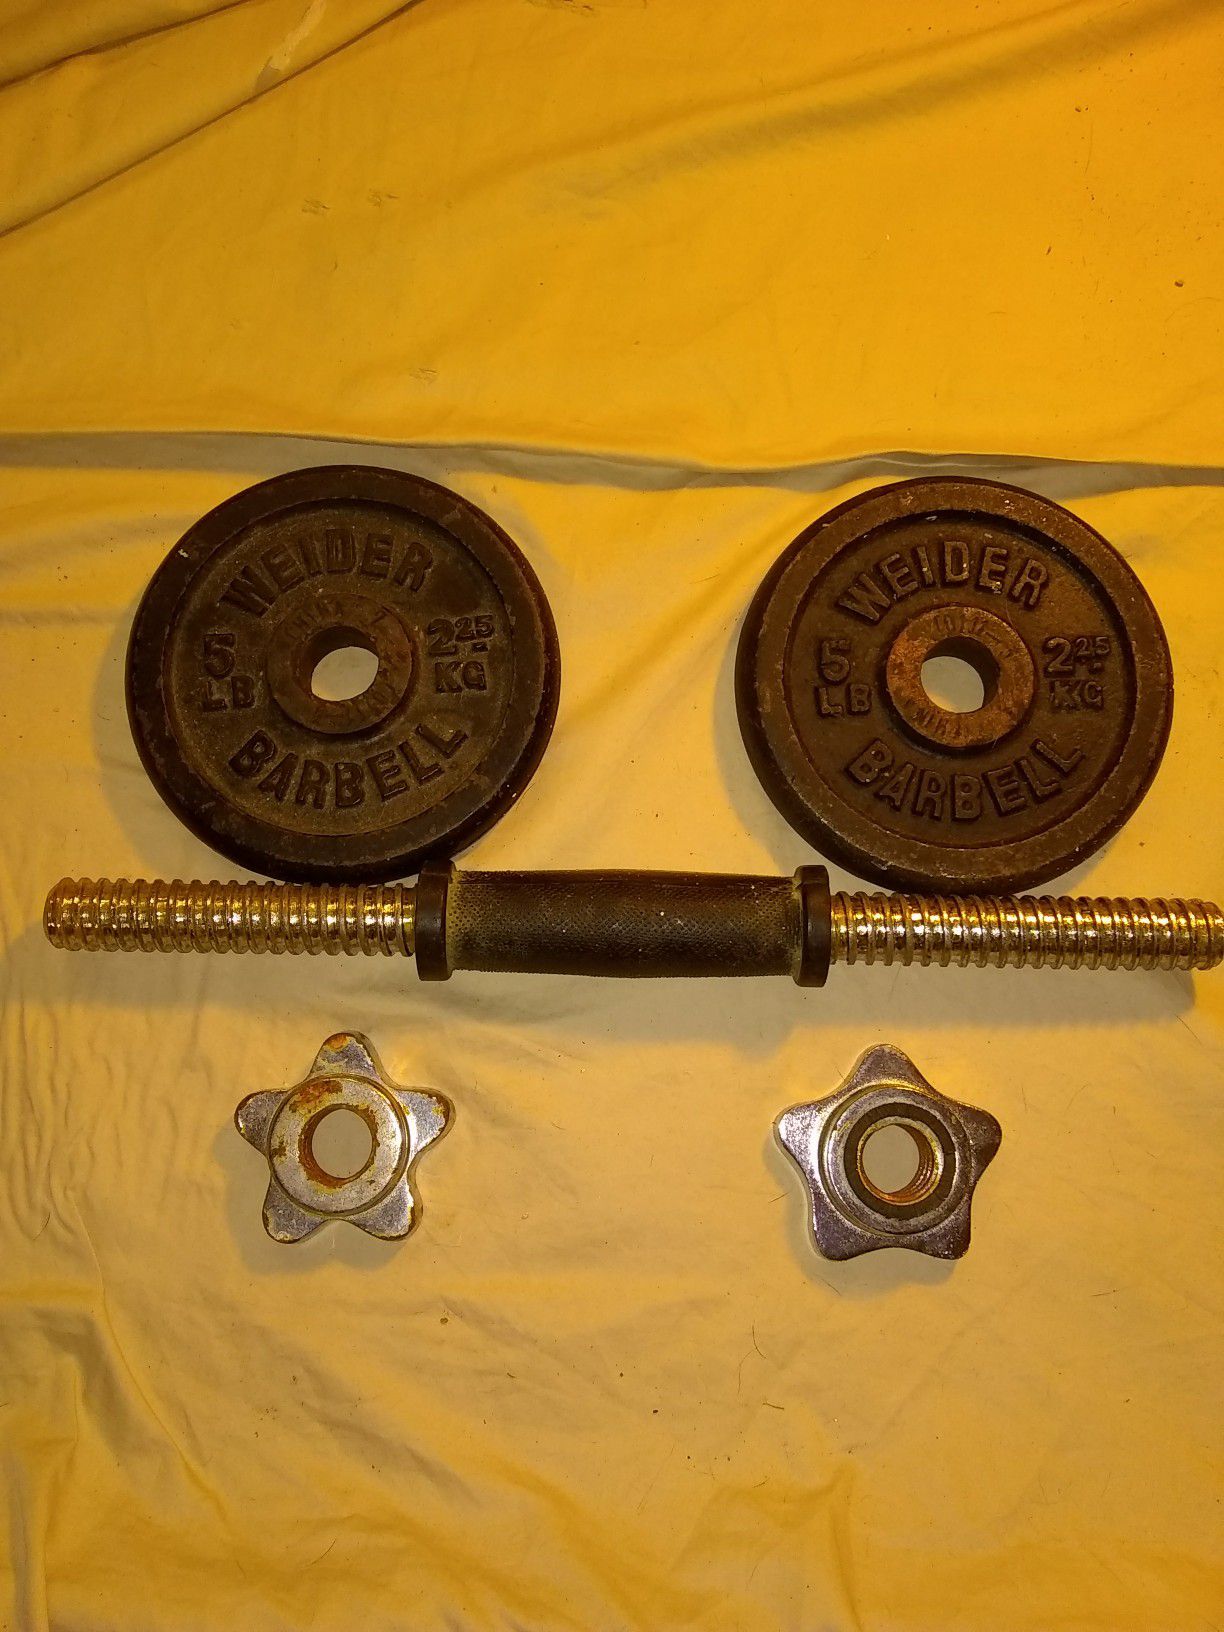 2 5lb. (2.25 kg) Weider Barbell Plates, Clips, and Bar